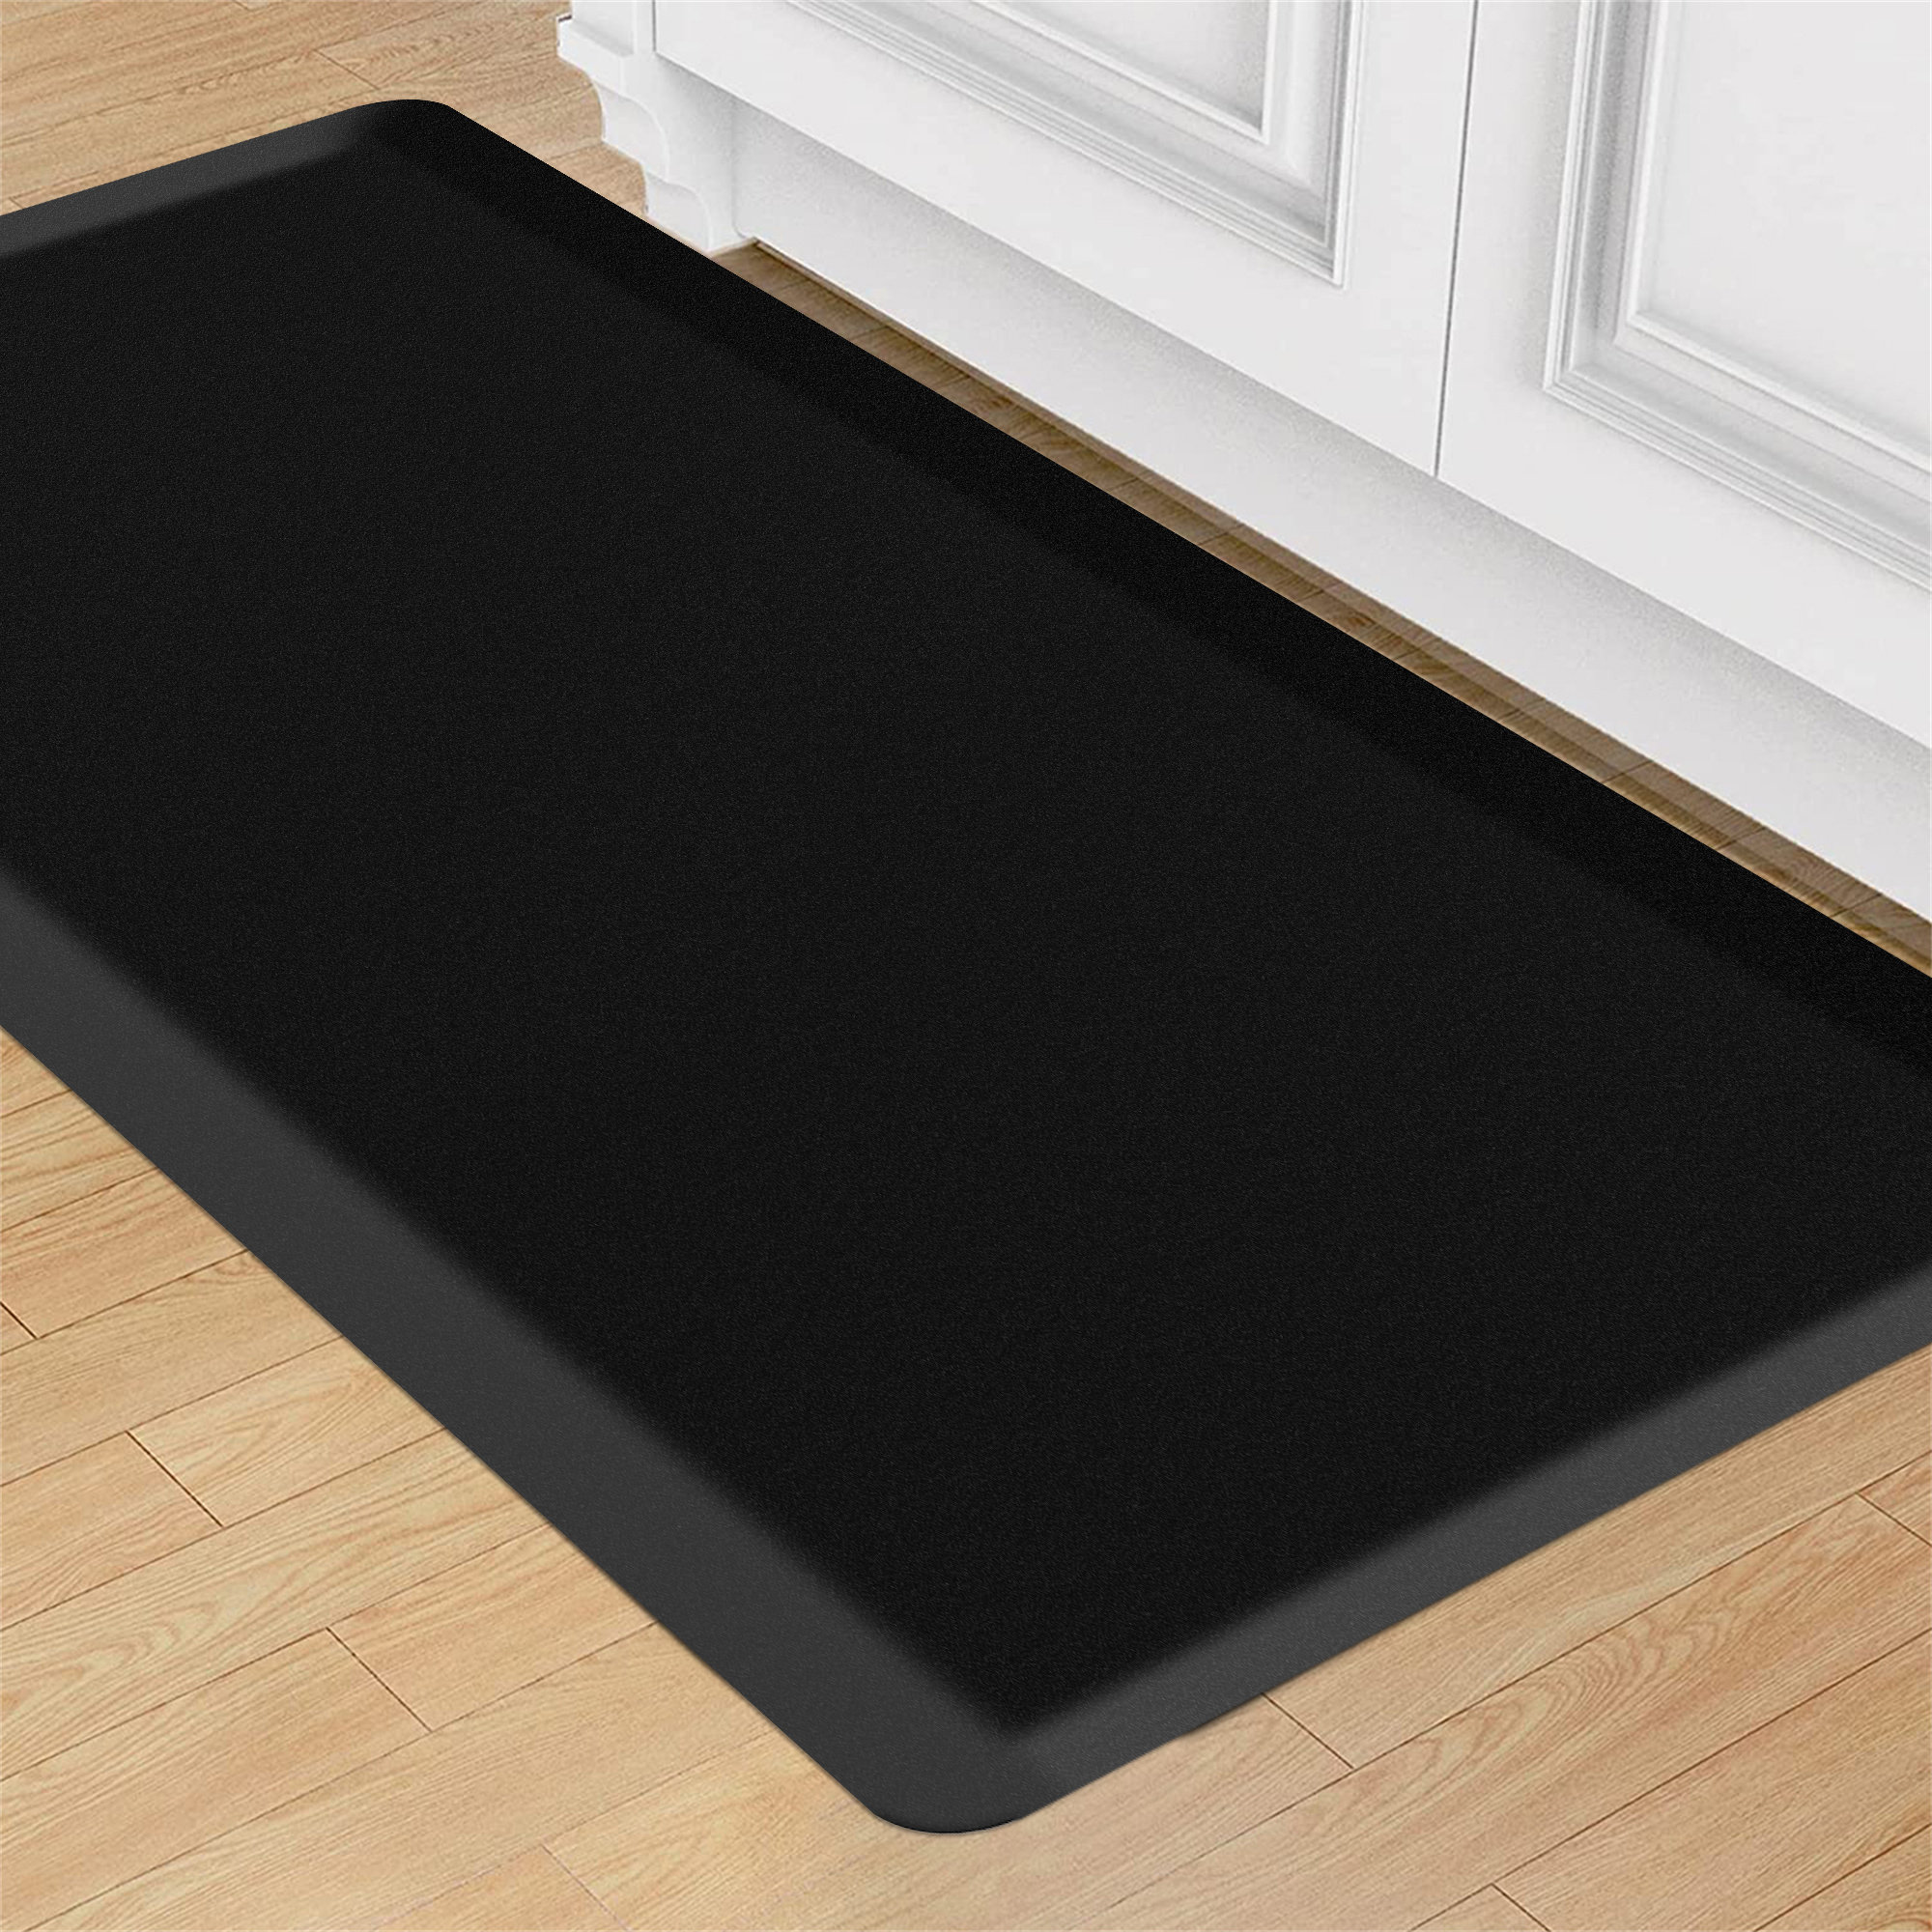  Mattitude Kitchen Mat [2 PCS] Cushioned Anti-Fatigue Non-Skid  Waterproof Rugs Ergonomic Comfort Standing Mat for Kitchen, Floor, Office,  Sink, Laundry, Blue and Gray: Home & Kitchen